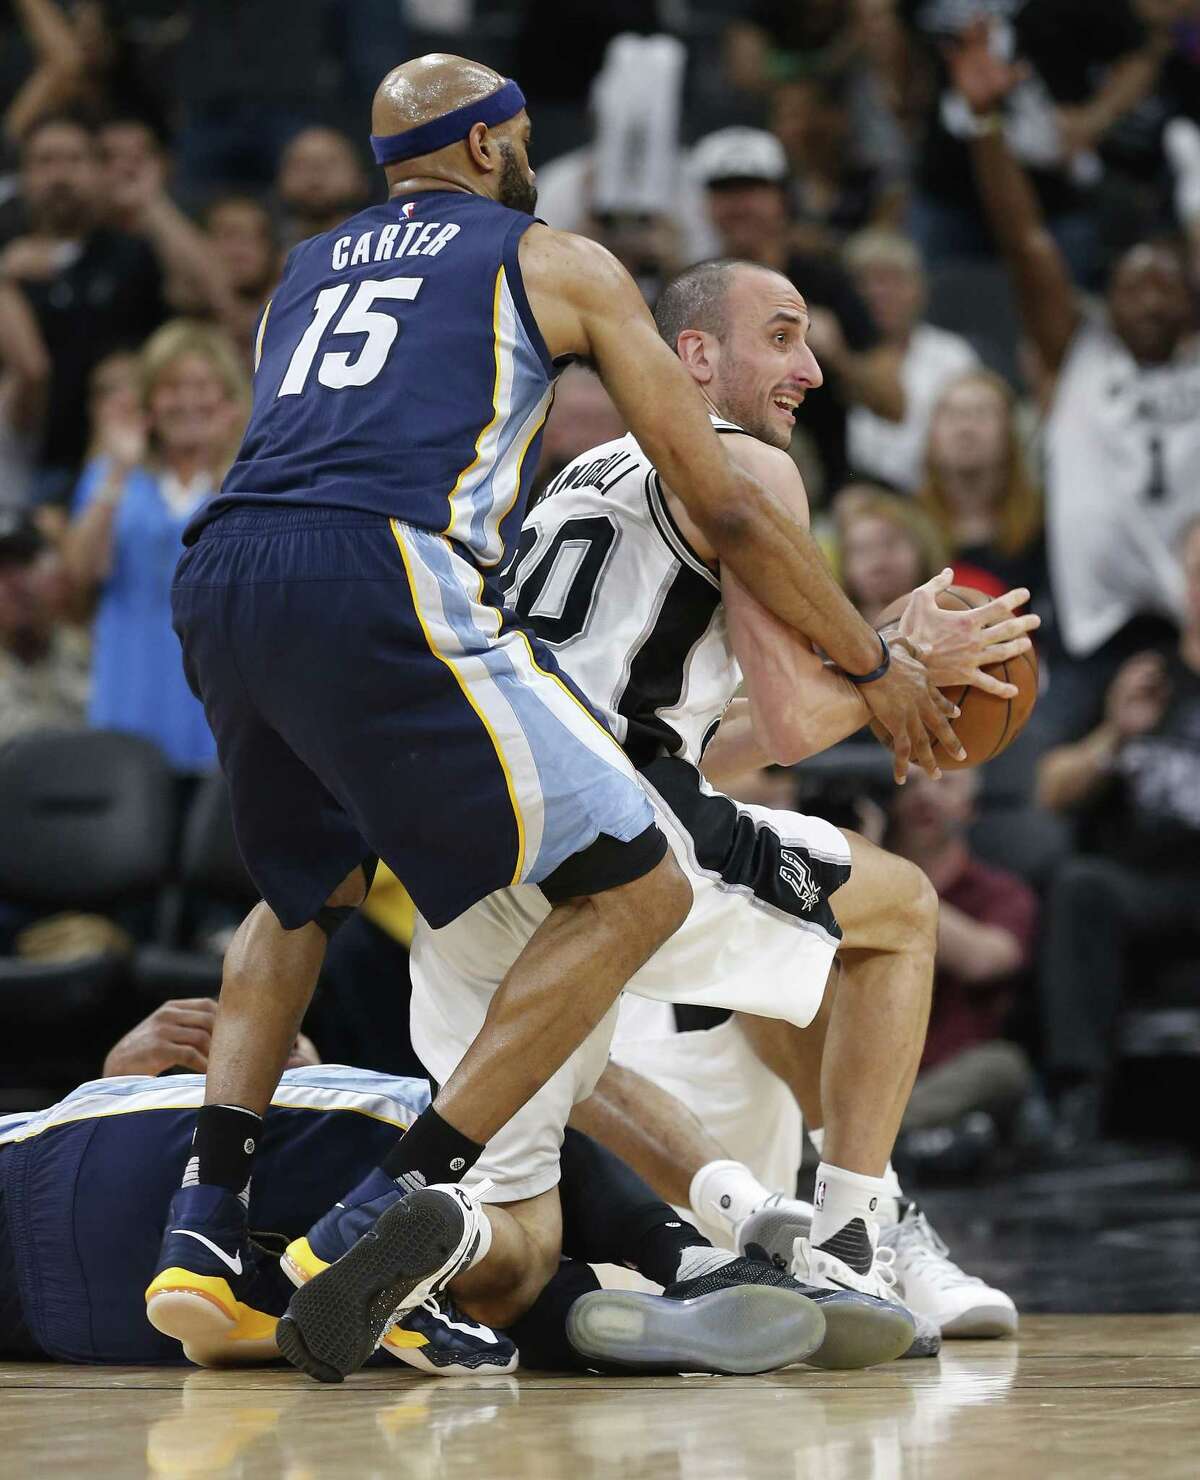 Spurs' Manu Ginobili (20) gets fouled by Memphis Grizzlies' Vince Carter (15) after a loose ball scramble during Game 5 of the Western Conference playoffs at the AT&T Center on Tuesday, Apr. 25, 2017.(Kin Man Hui/San Antonio Express-News)